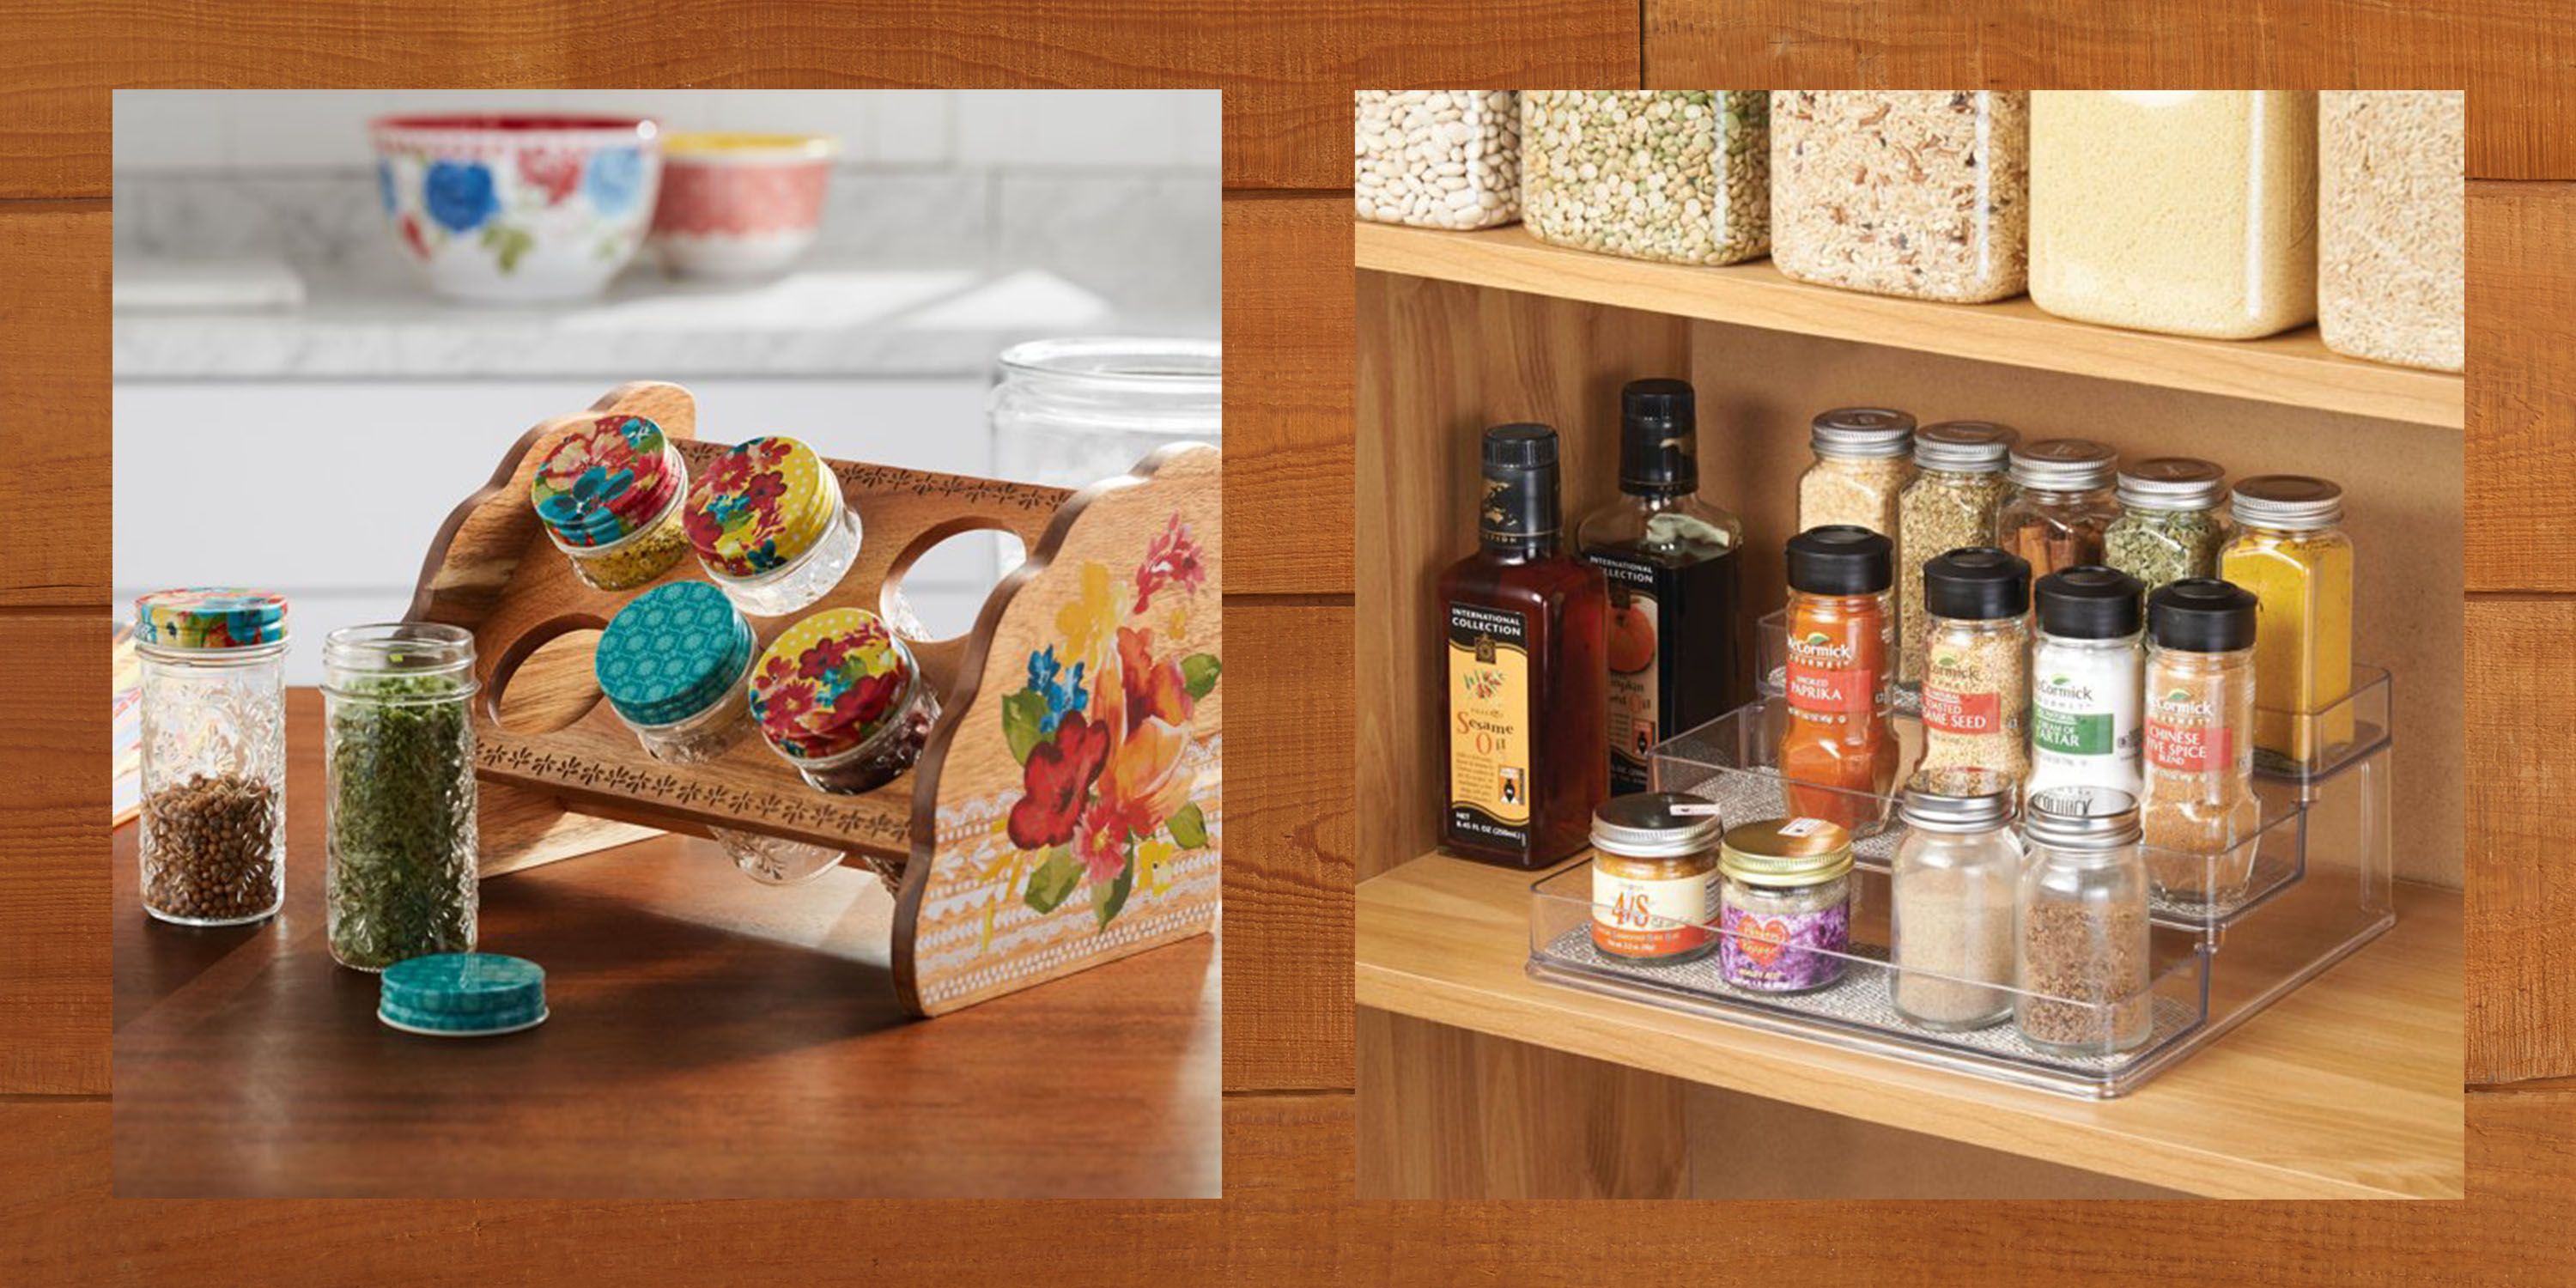 12 lovely spice racks to keep your kitchen looking tidy